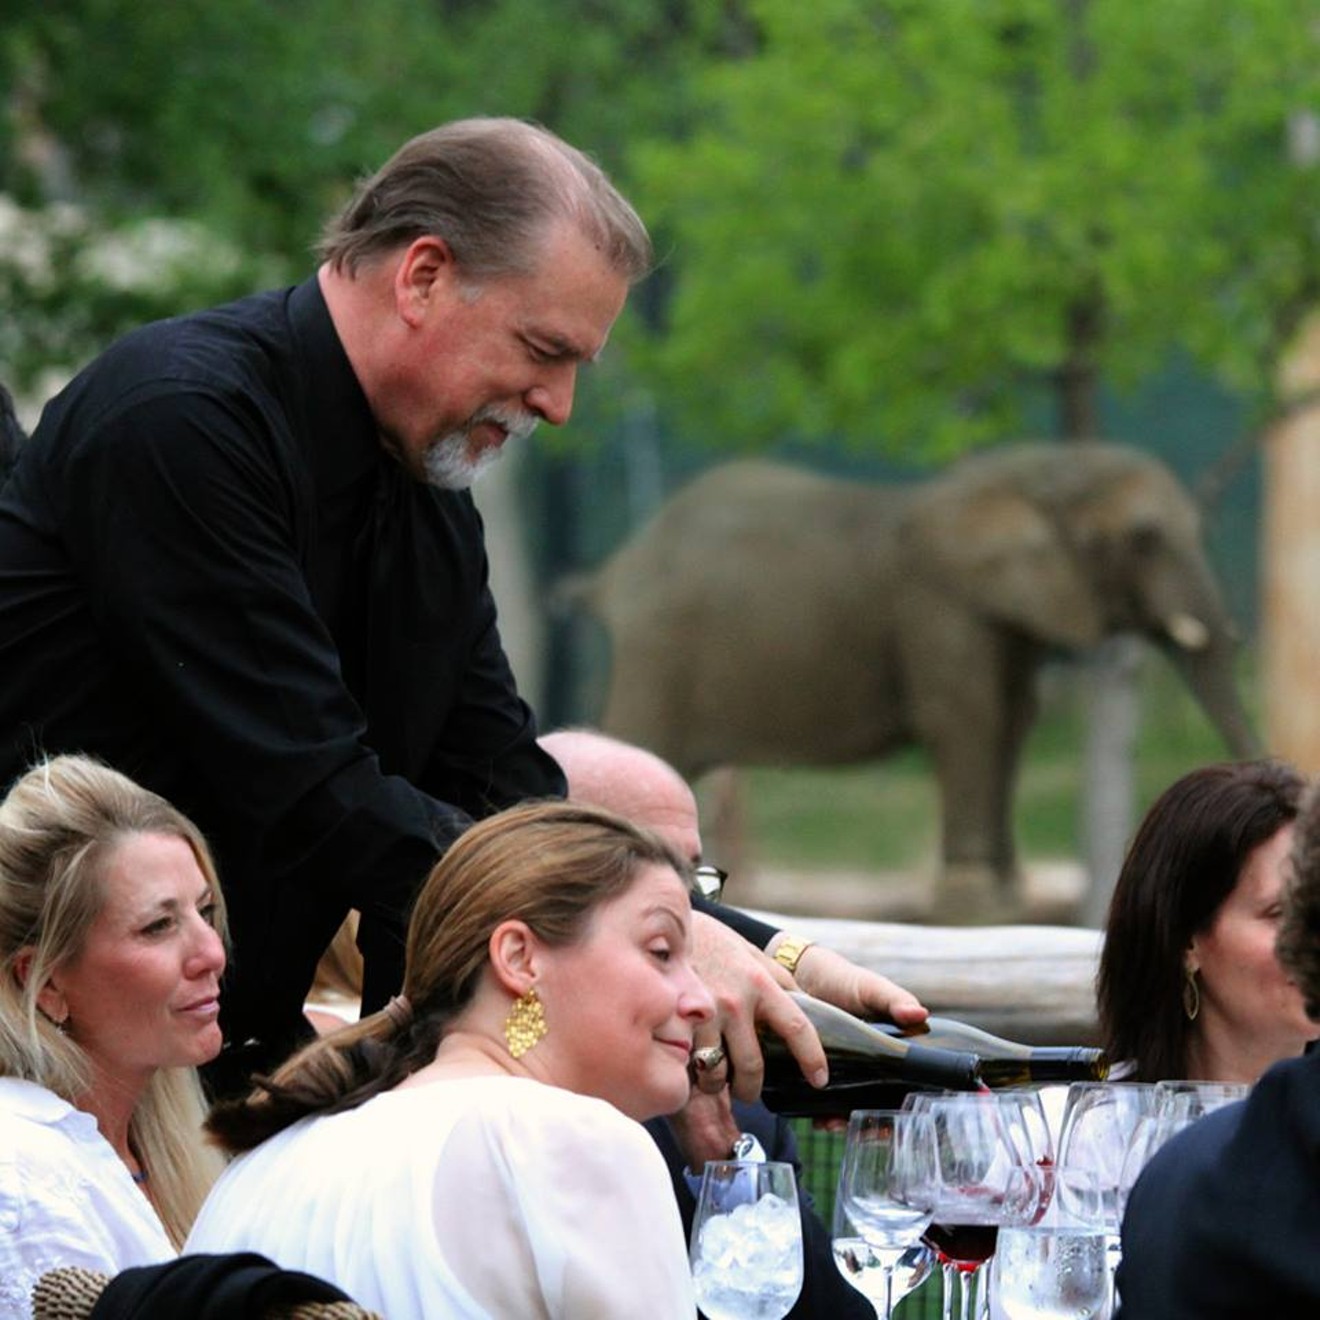 At this weekend's Corks For Conservation event, visitors can sip wine in proximity to elephants.